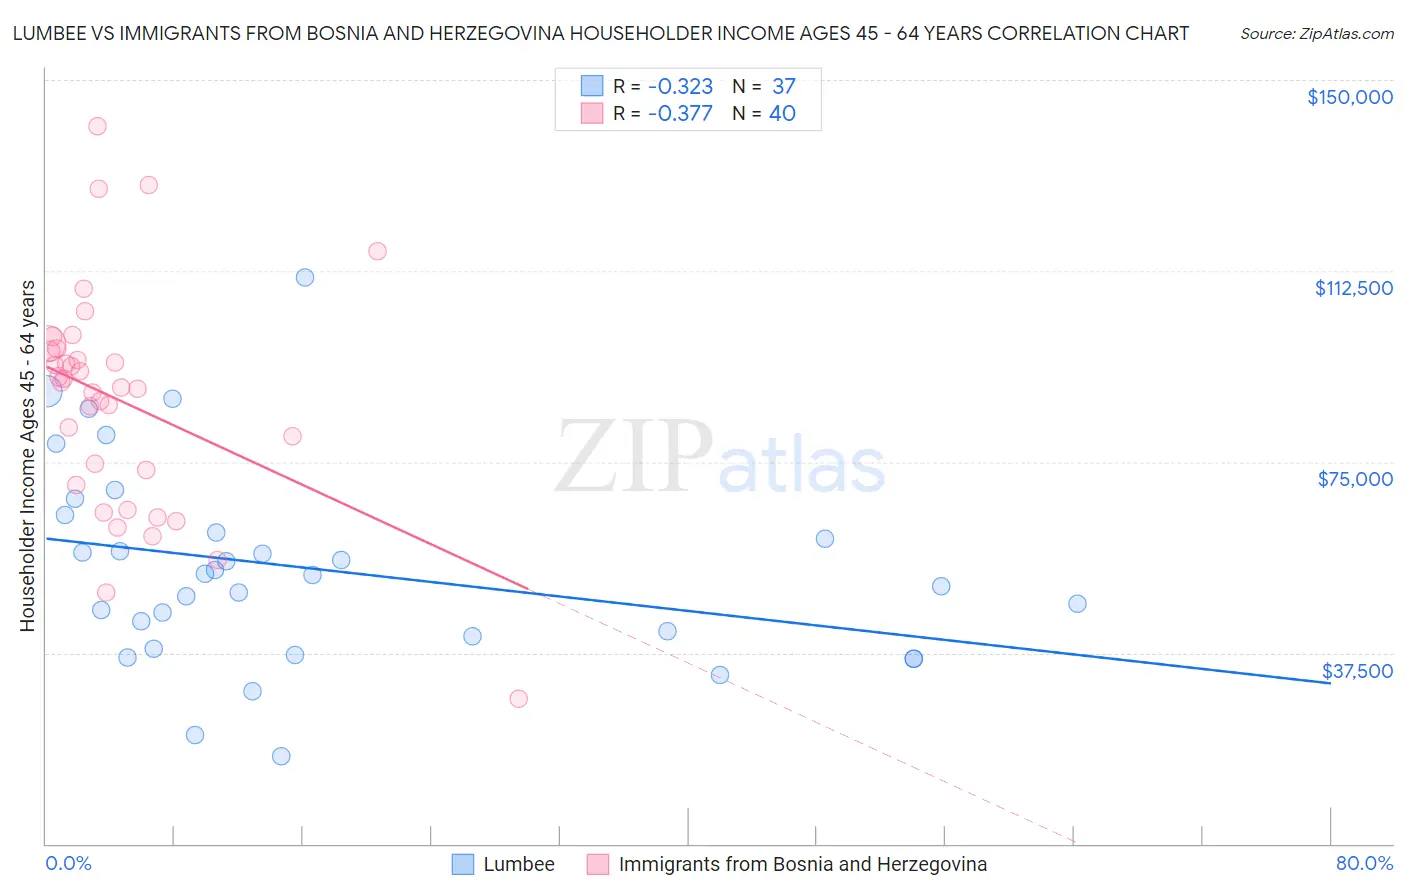 Lumbee vs Immigrants from Bosnia and Herzegovina Householder Income Ages 45 - 64 years